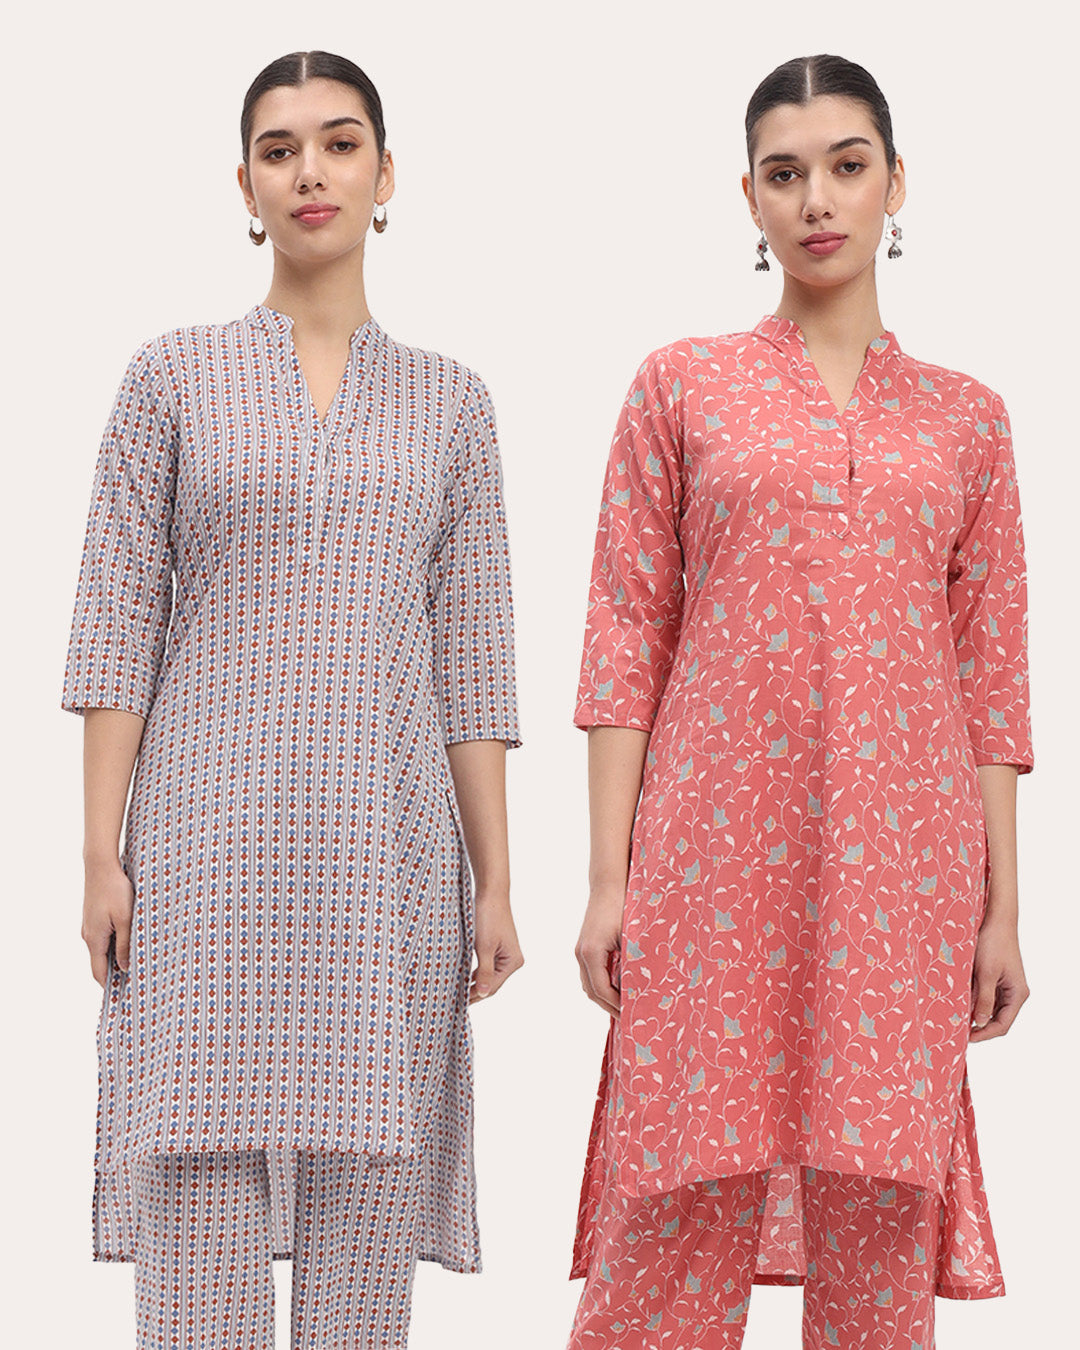 Combo: Ivory Quadrangle & English Floral Garden High-Low Printed Kurta (Without Bottoms)